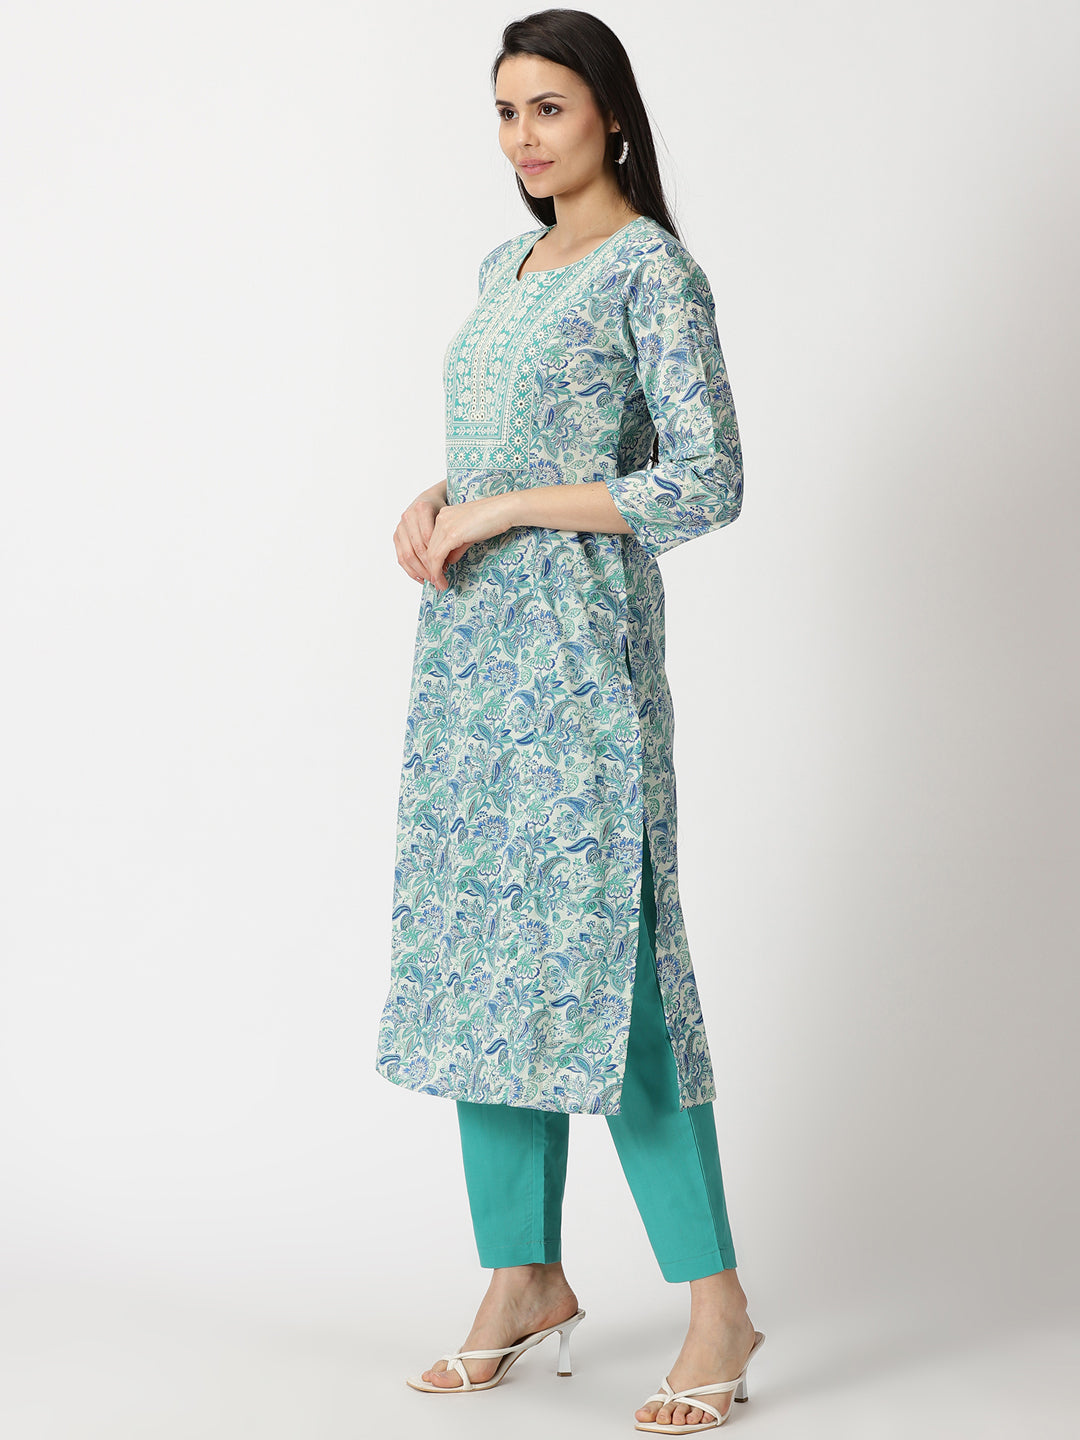 Women Floral Print Pure Cotton Anarkali Kurti Price in India Full  Specifications  Offers  DTashioncom